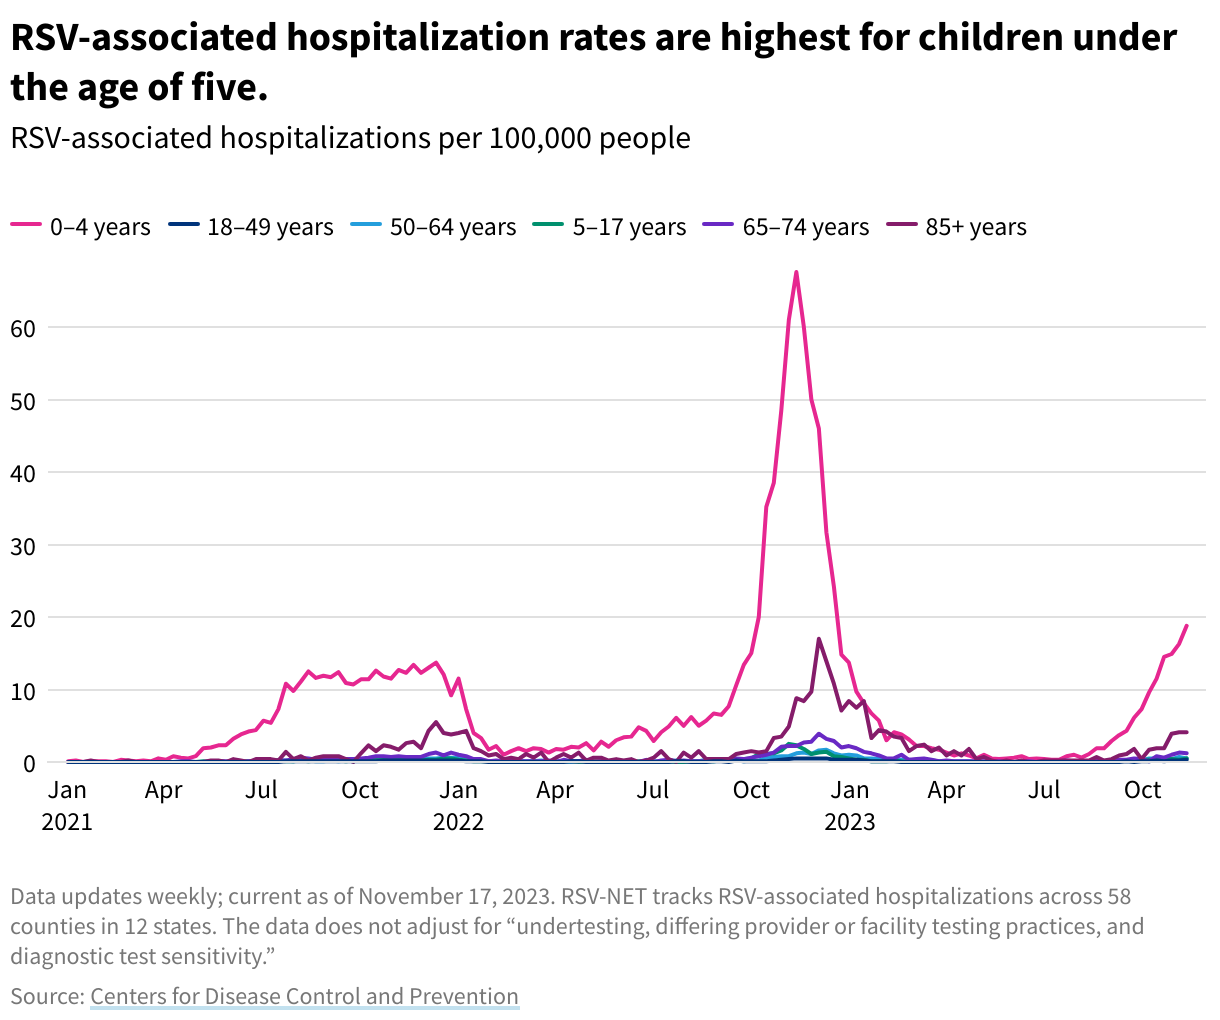 A line chart showing RSV-associated hospitalizations per 100,000 people for each age group from January 2021 to November 2023. Children ages 0–4 have the highest rates.